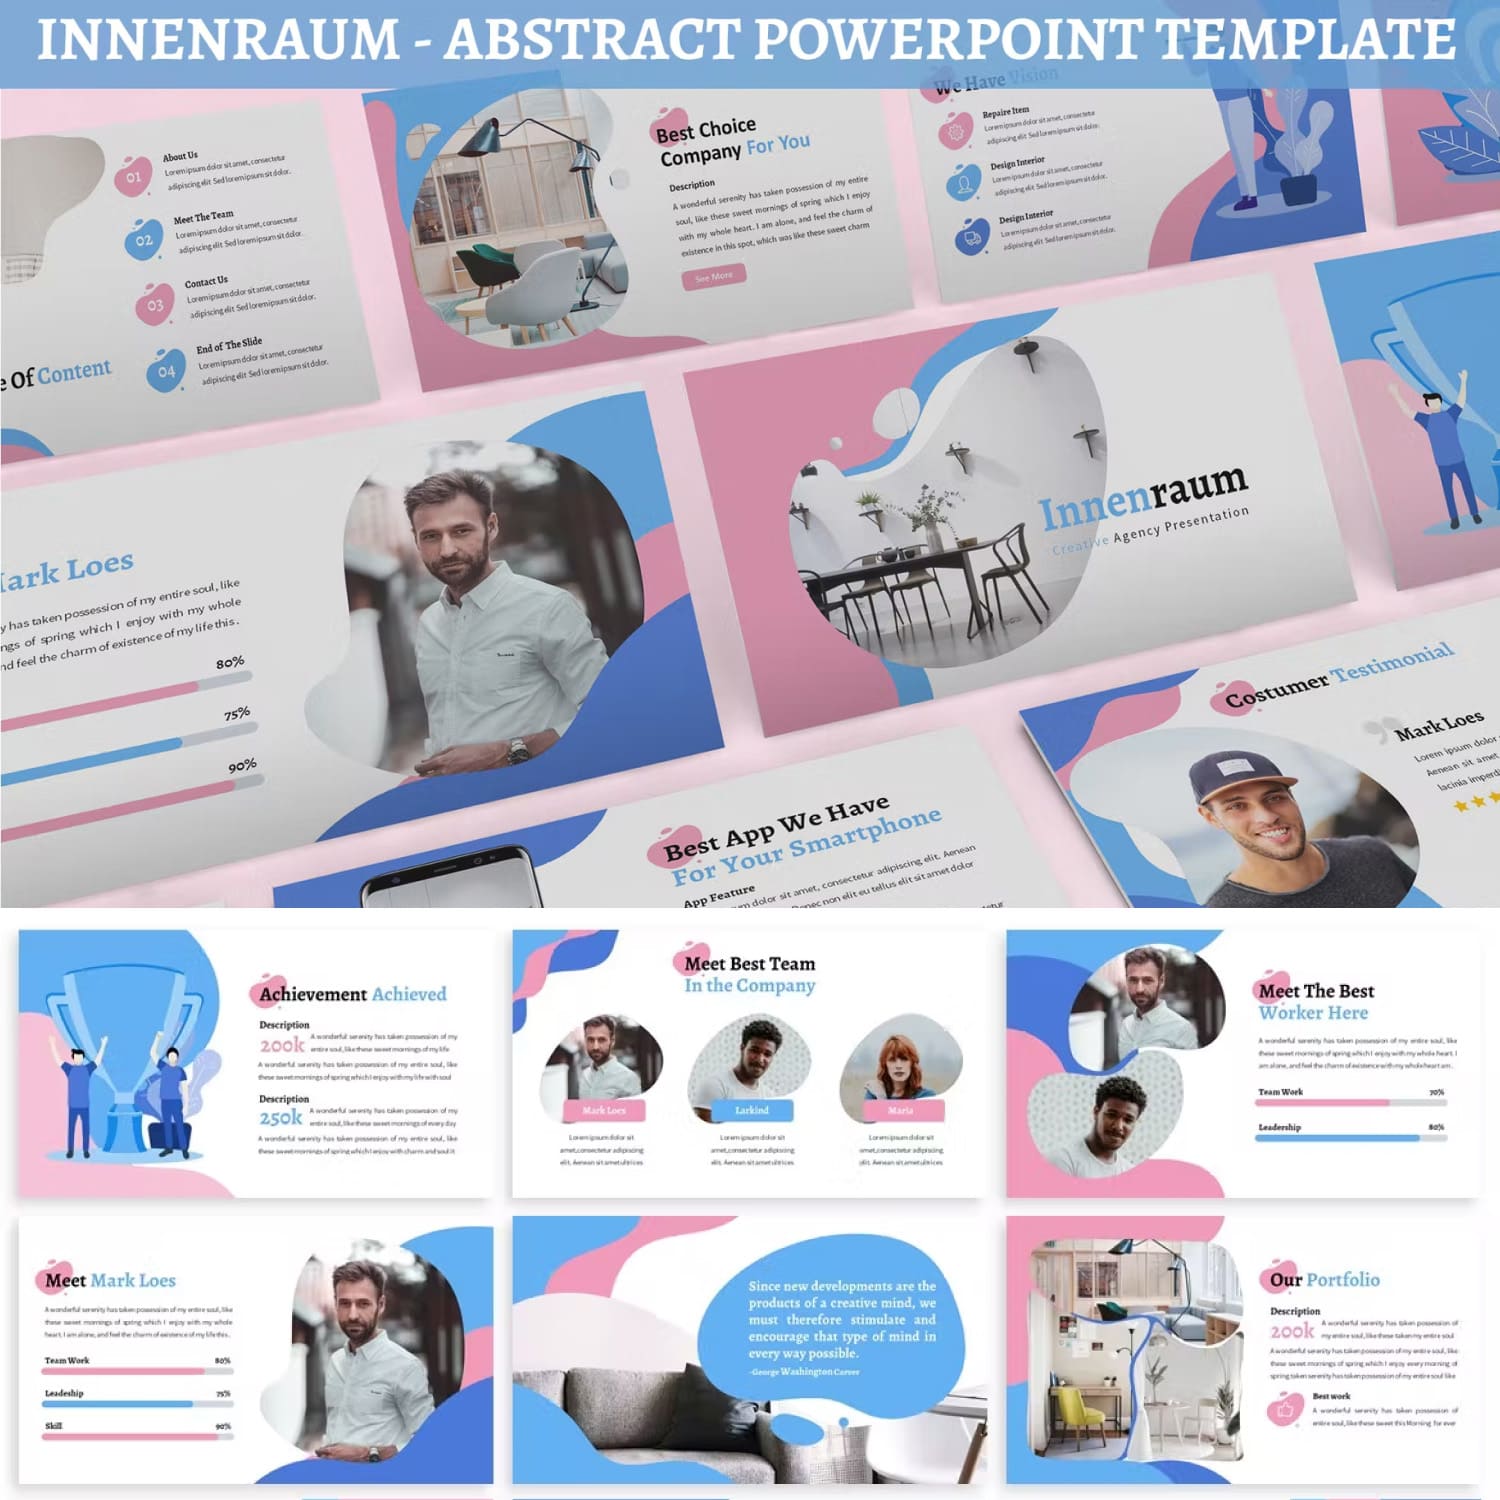 Innenraum abstract powerpoint template - main image preview.